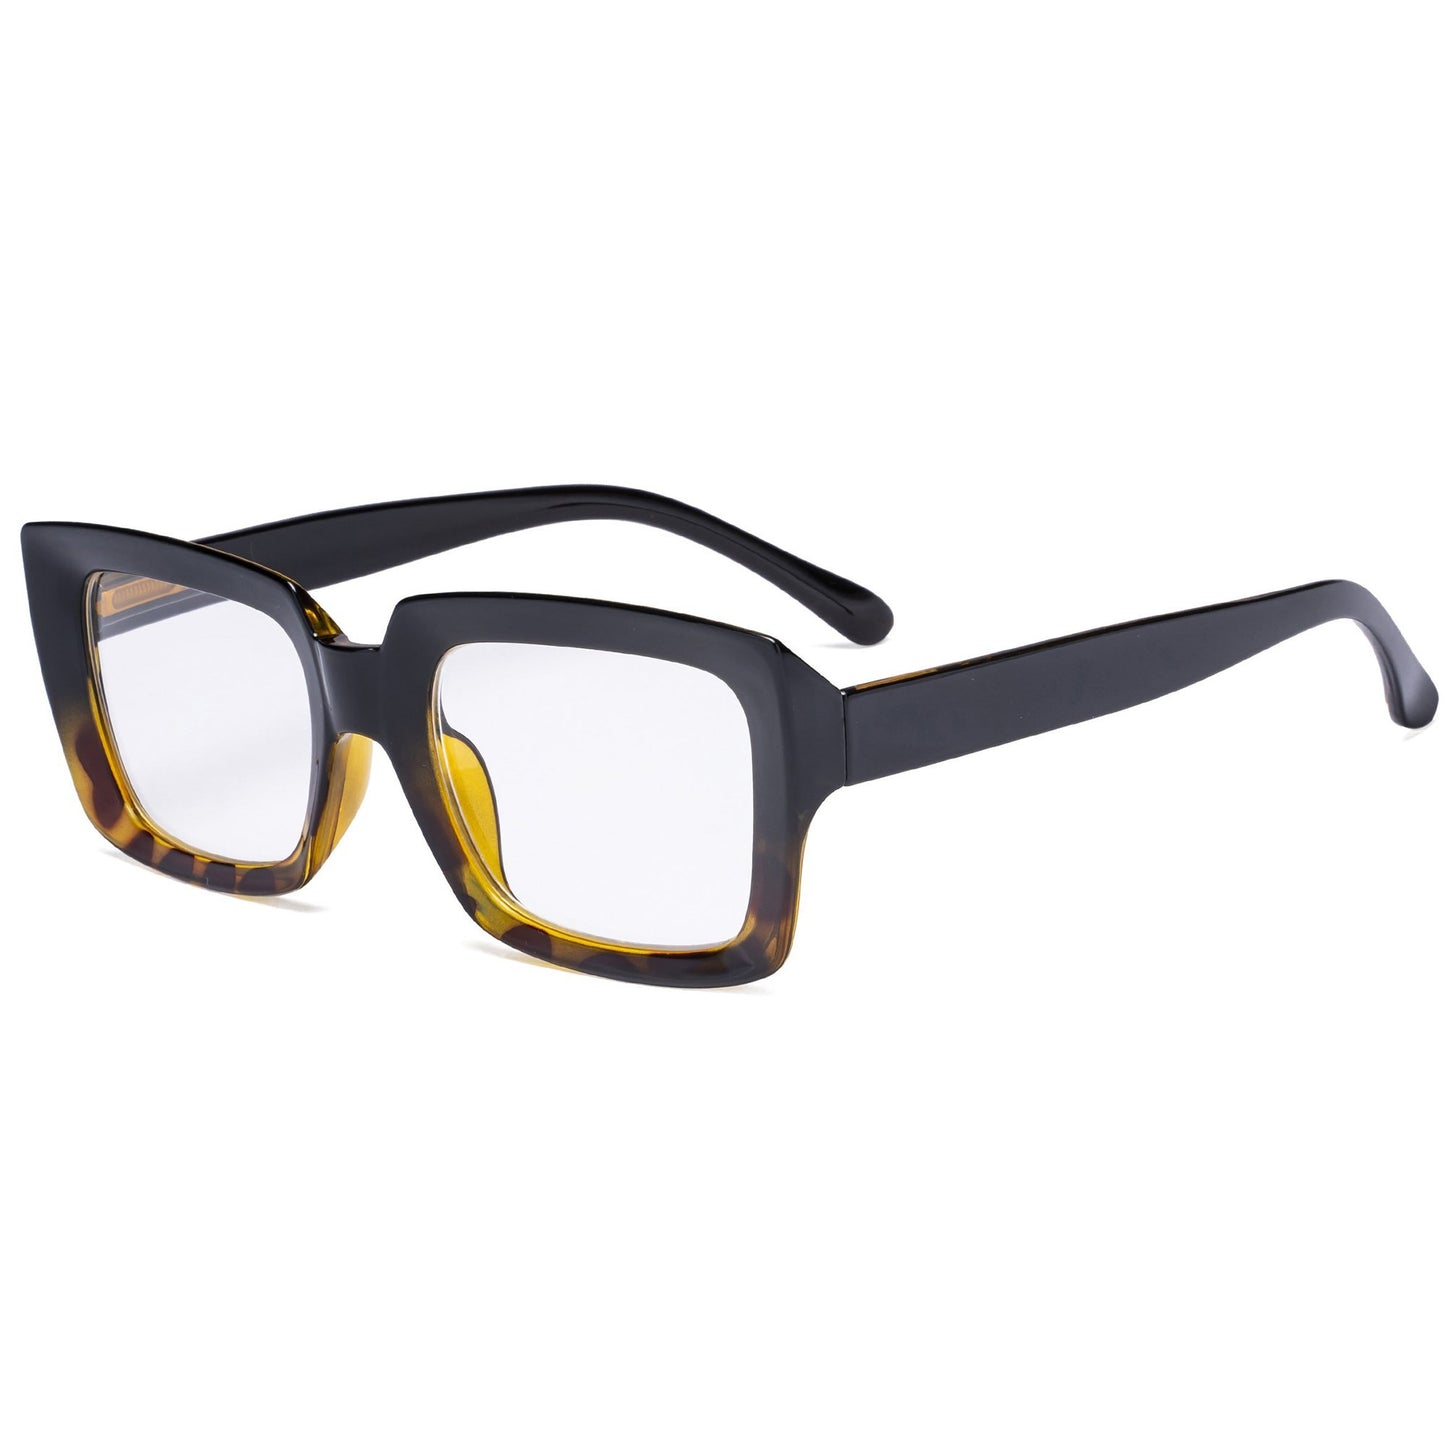 Stylish Reading Glasses Oversized Square Readers R9107-1